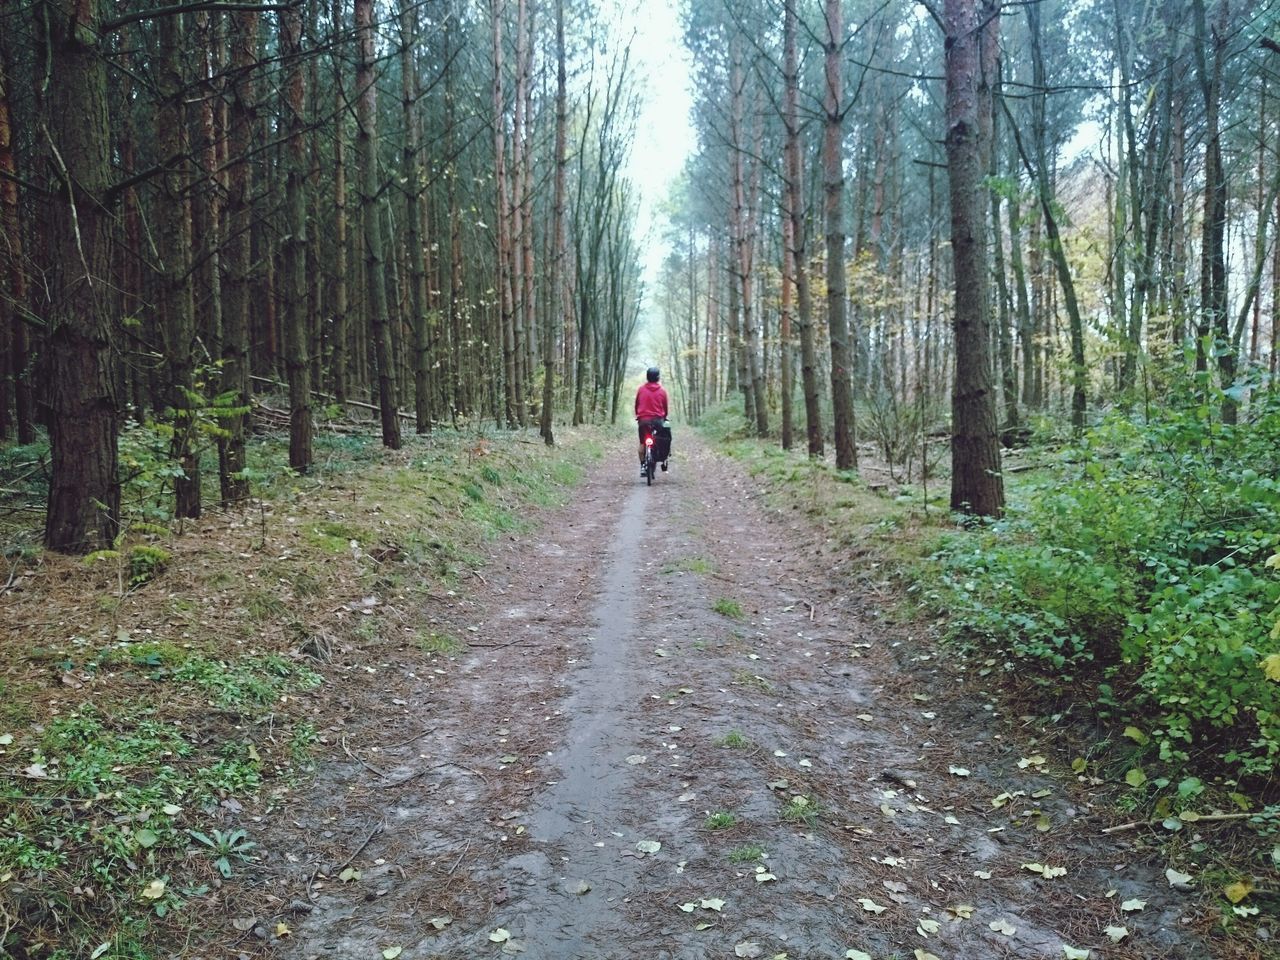 Rear view of man riding bicycle on dirt road amidst trees